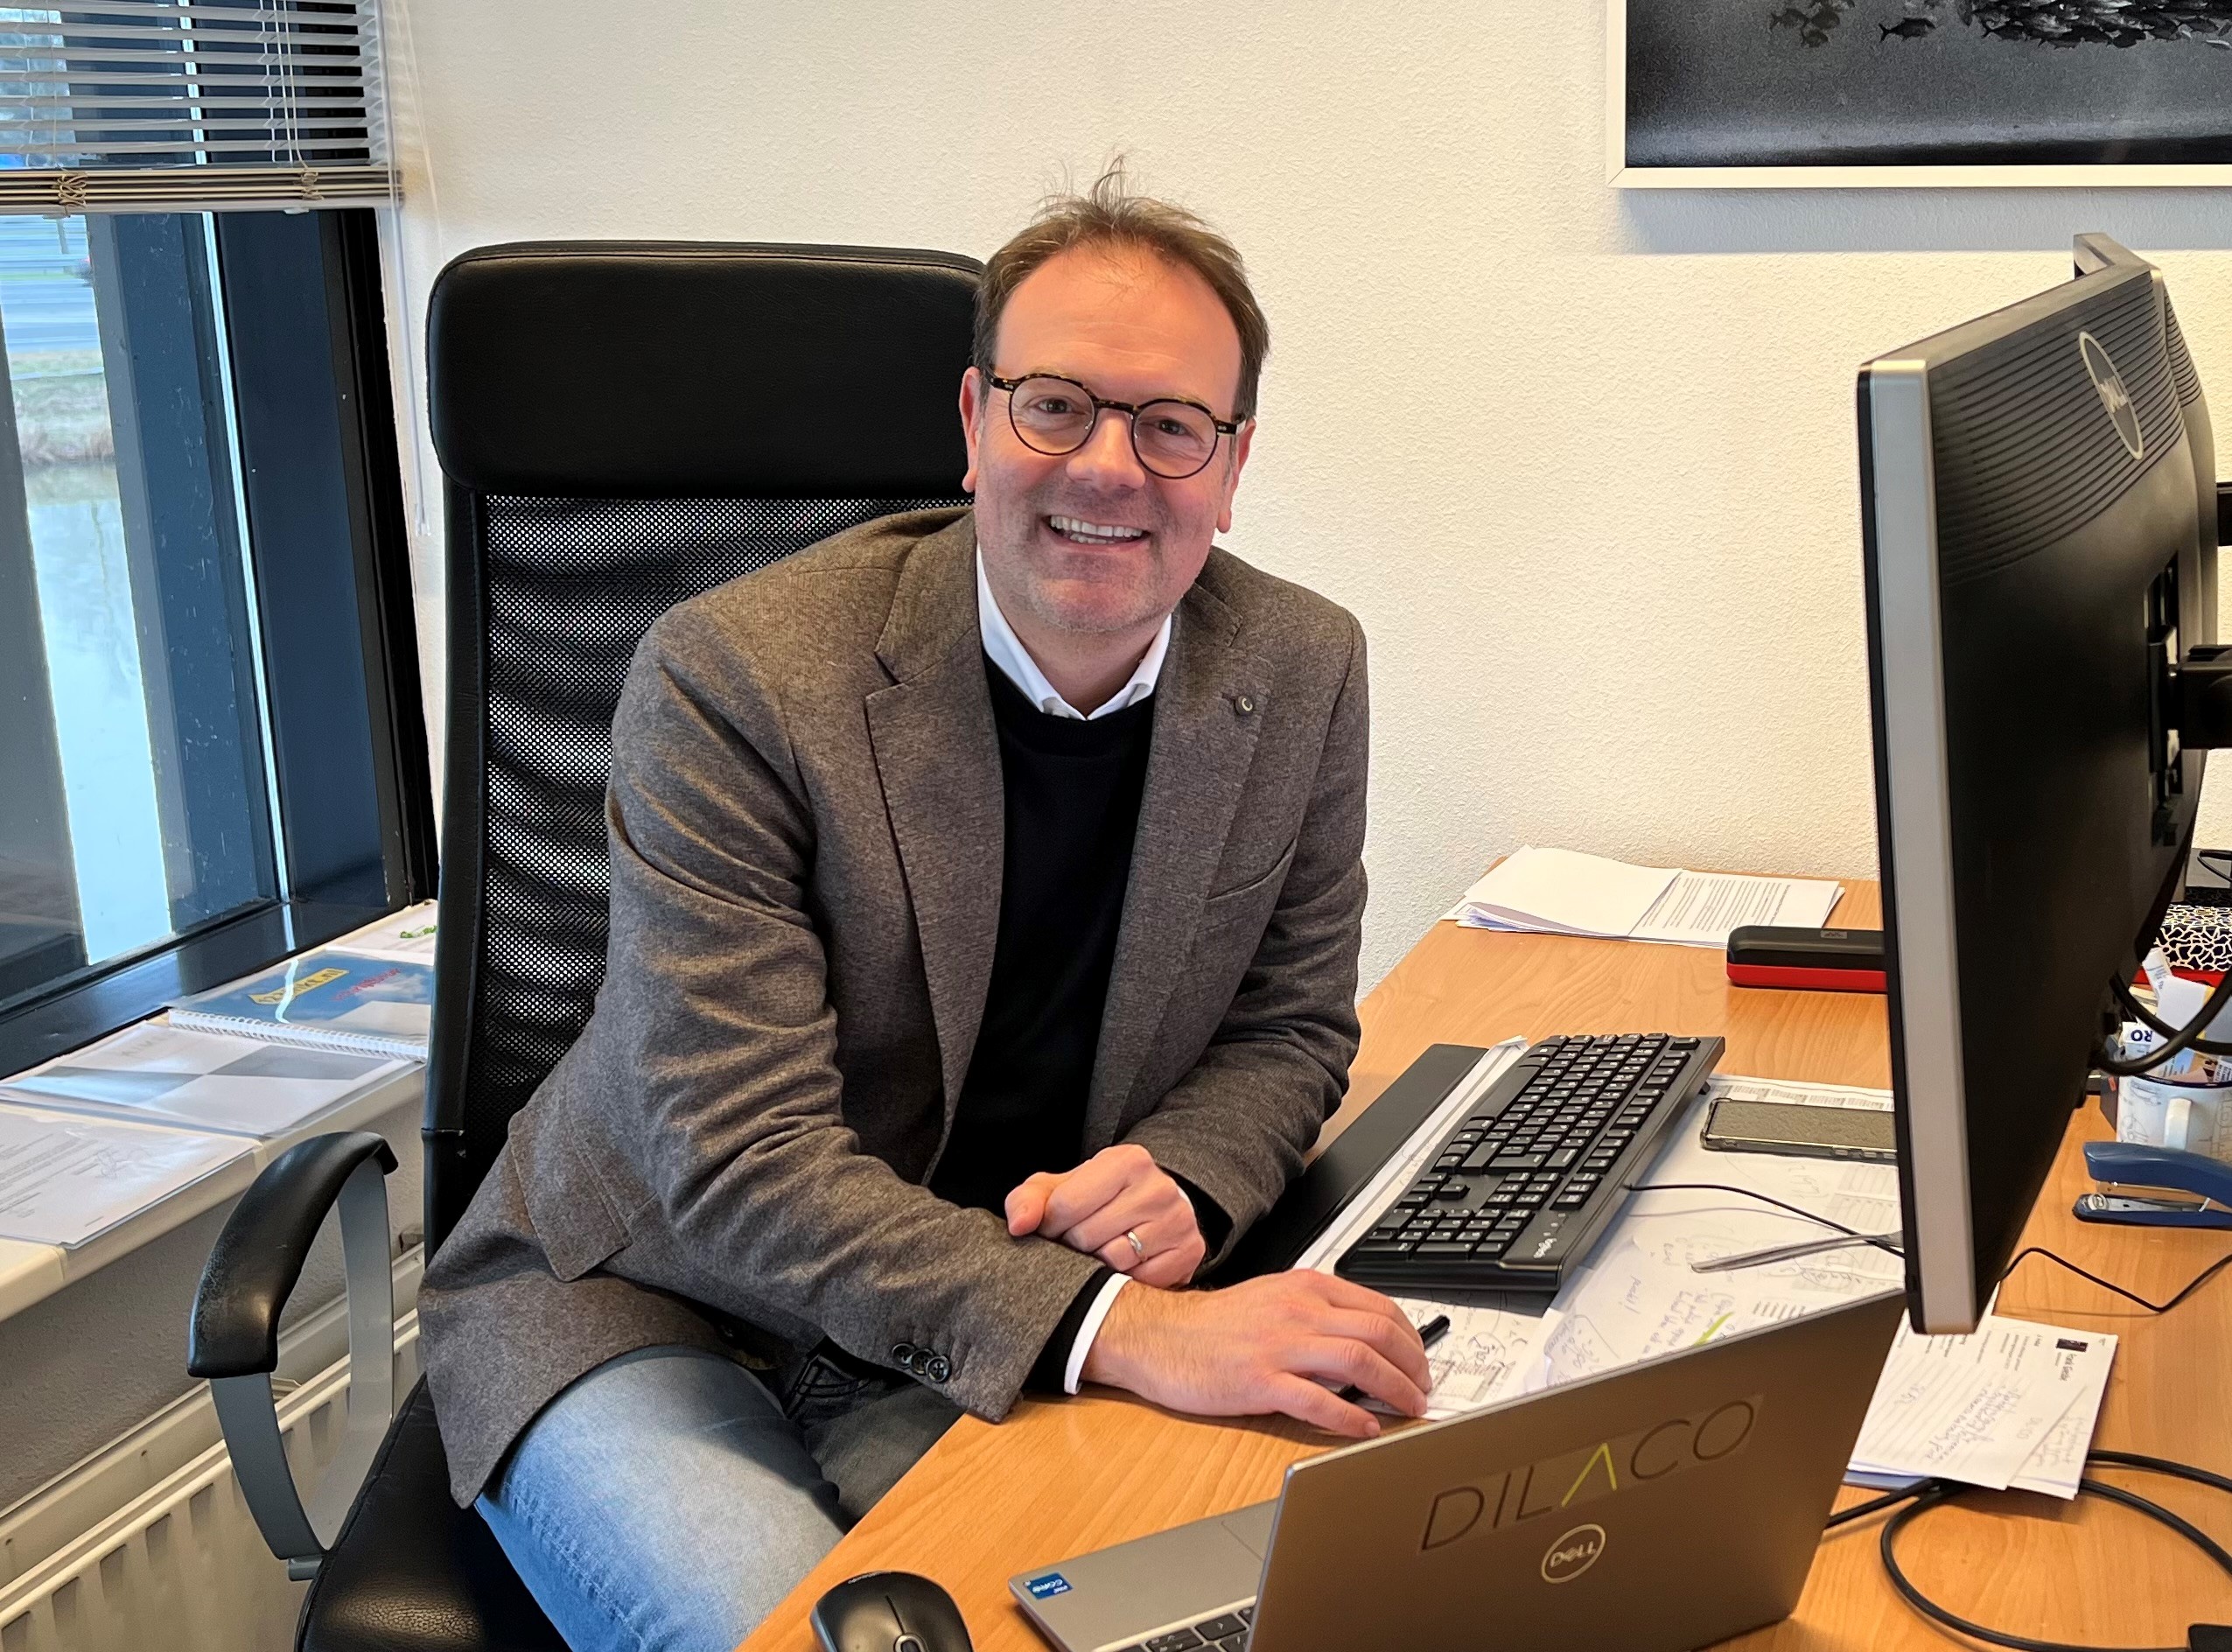 Martijn Gevers, Country Manager of Dilaco NL